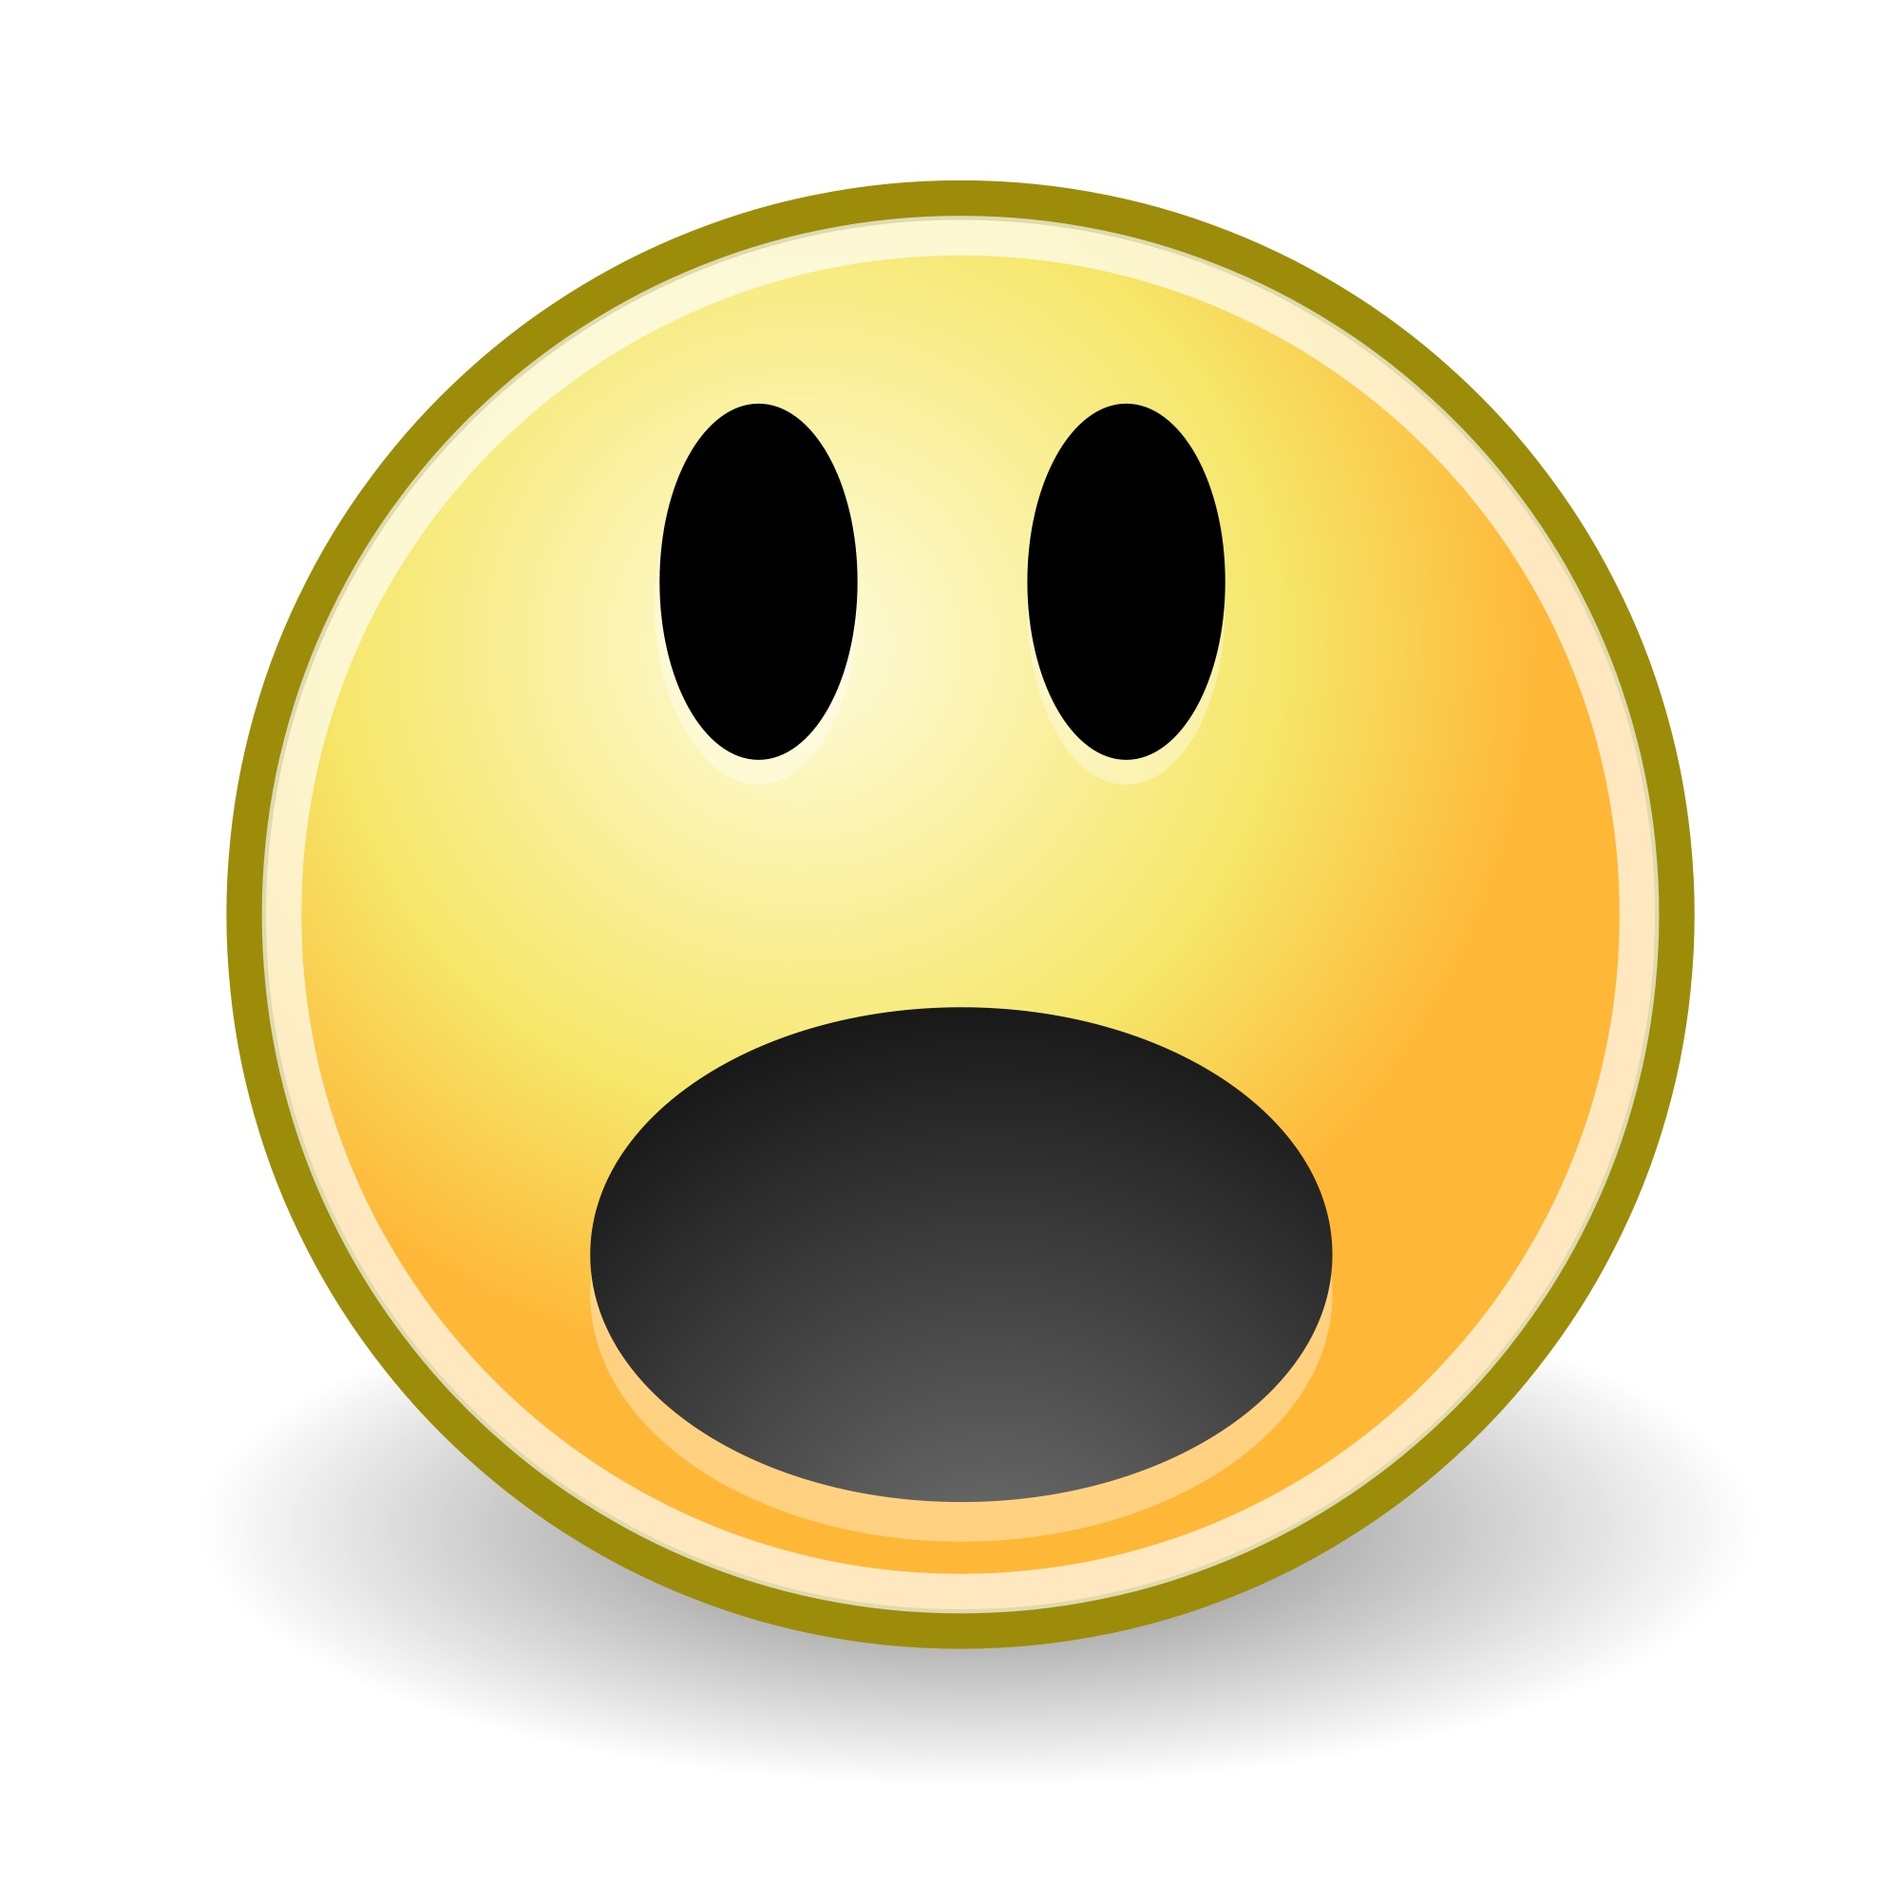 Pix For > Funny Surprised Cartoon Face Clipart - Free to use Clip ...